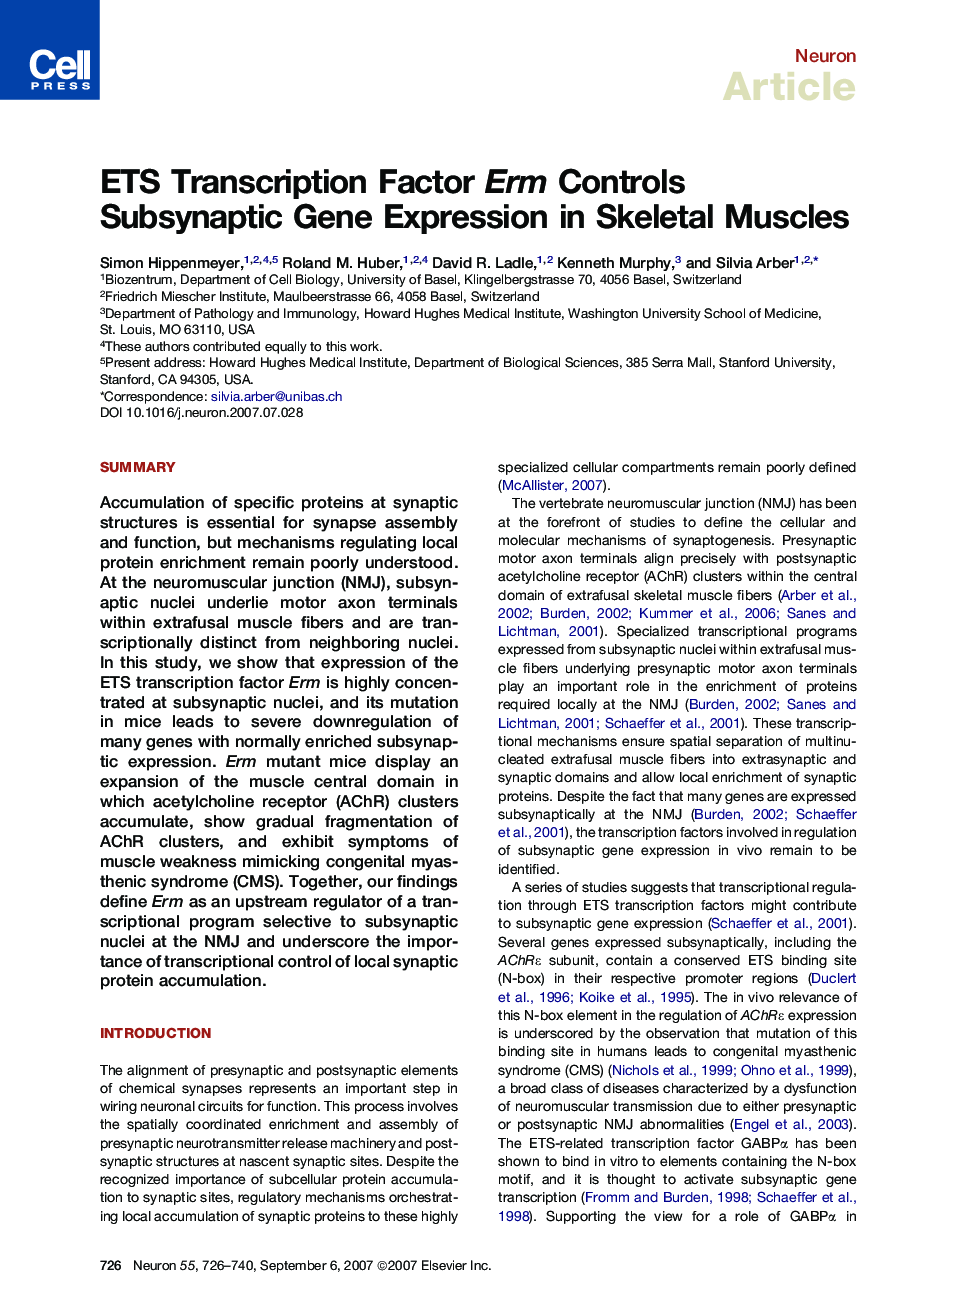 ETS Transcription Factor Erm Controls Subsynaptic Gene Expression in Skeletal Muscles